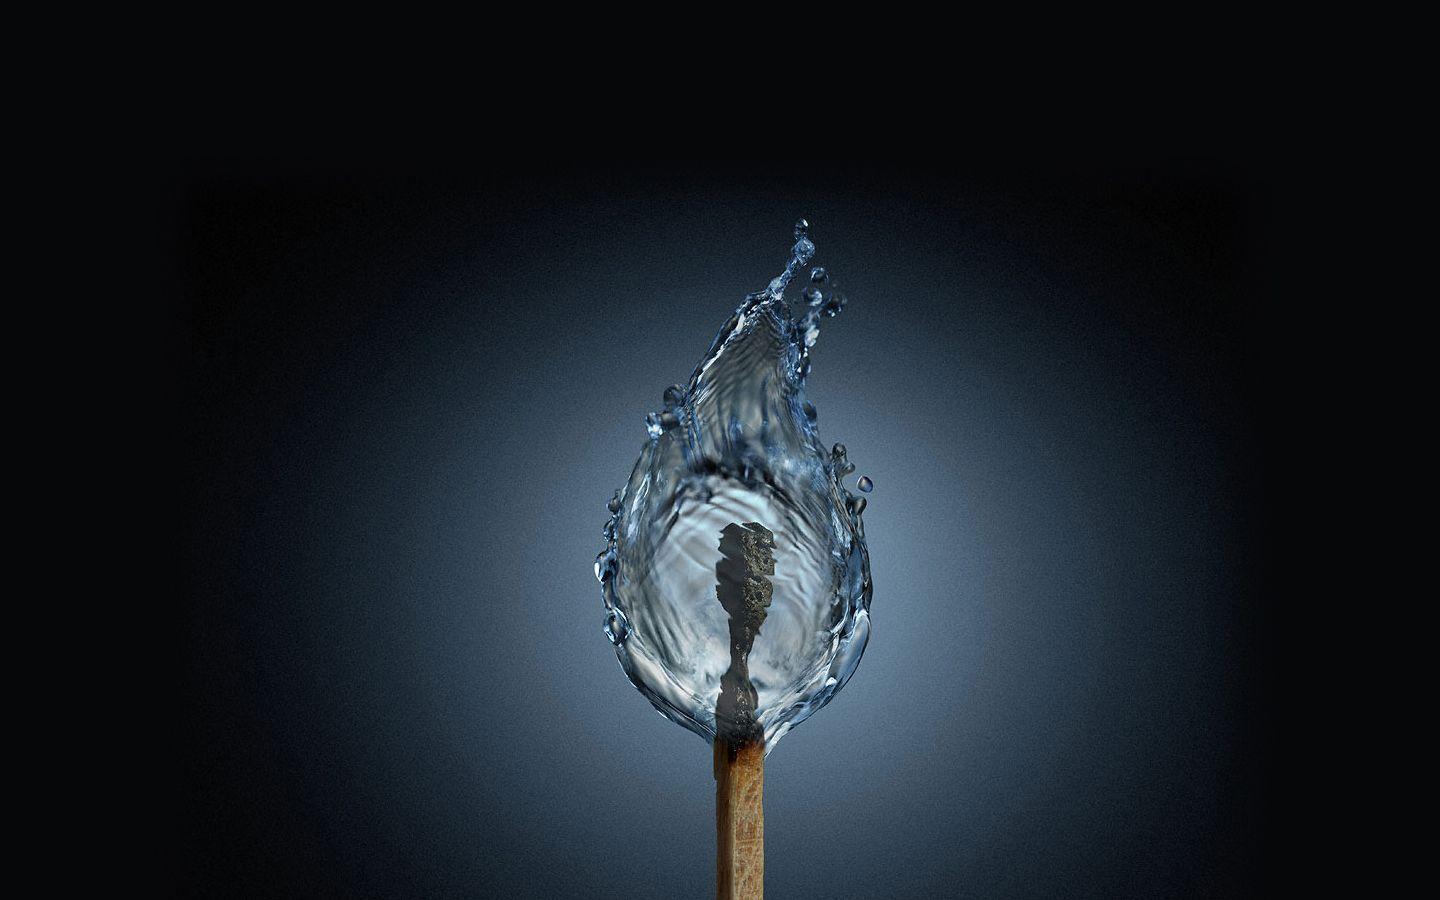 The Image of Water Abstract Surreal Matchsticks 1440x900 HD